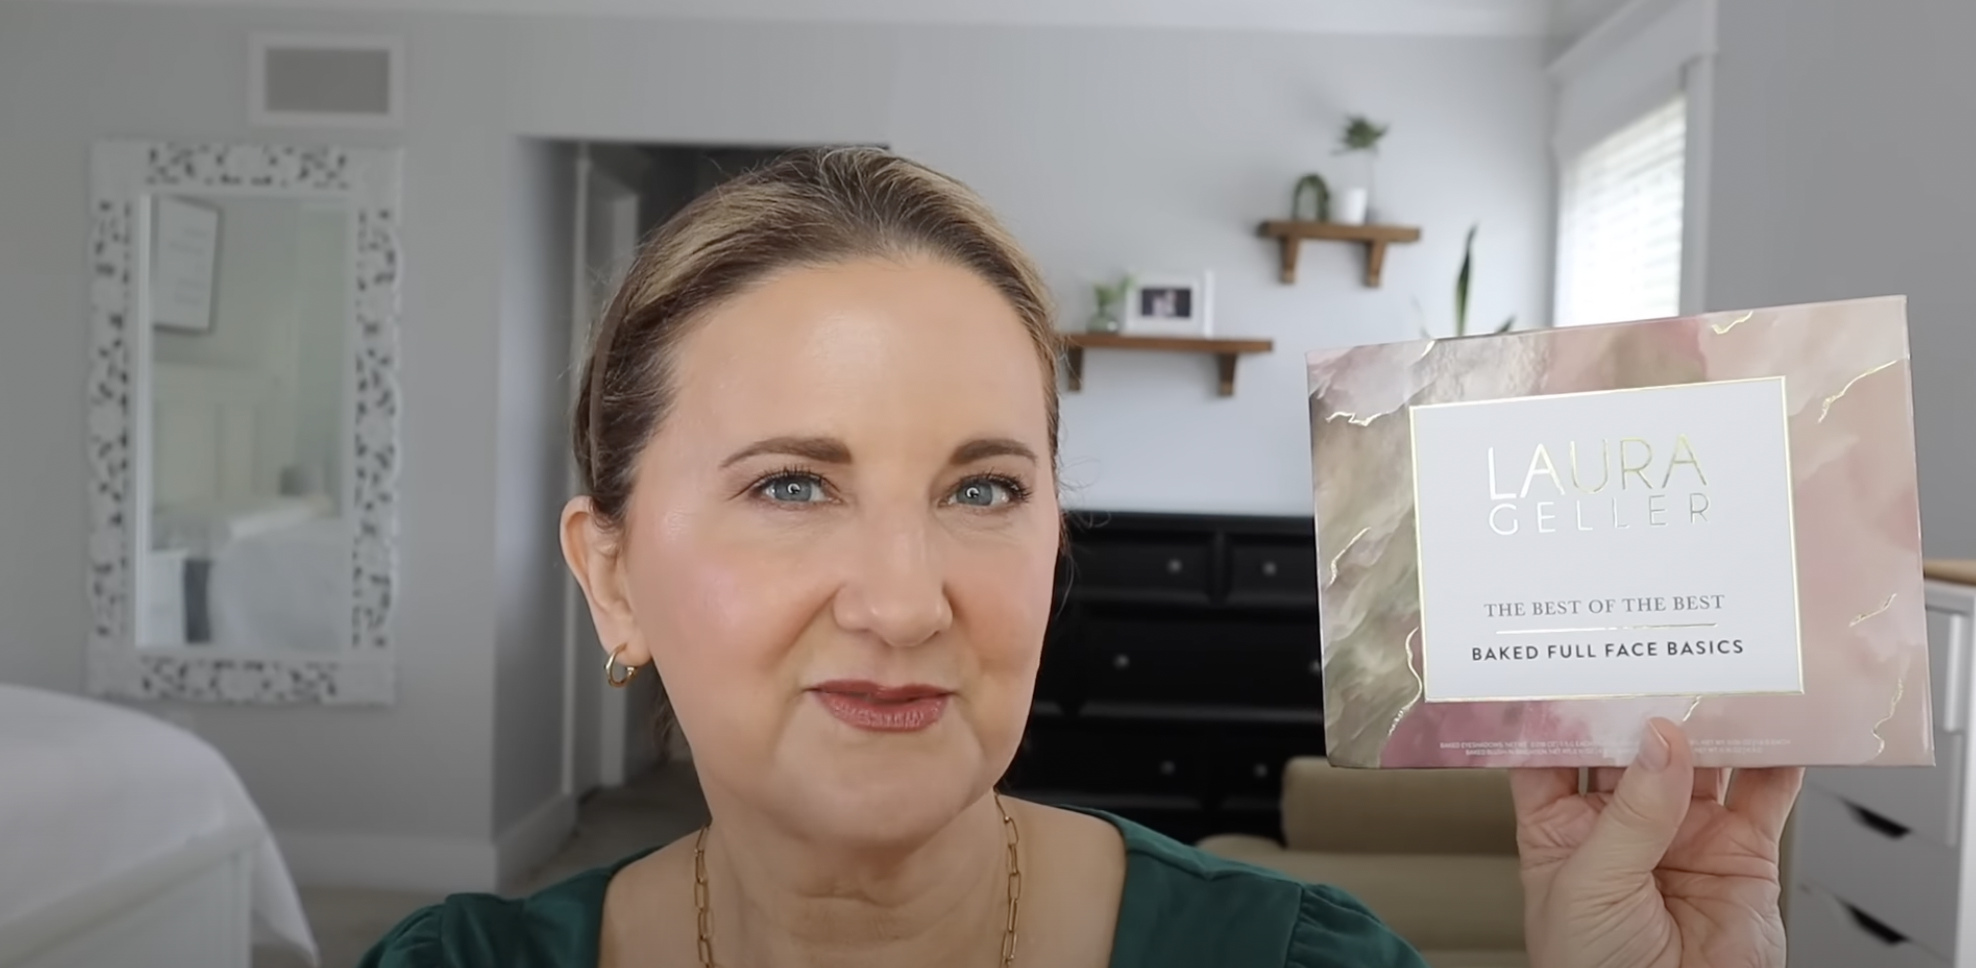 Woman showing laura geller product